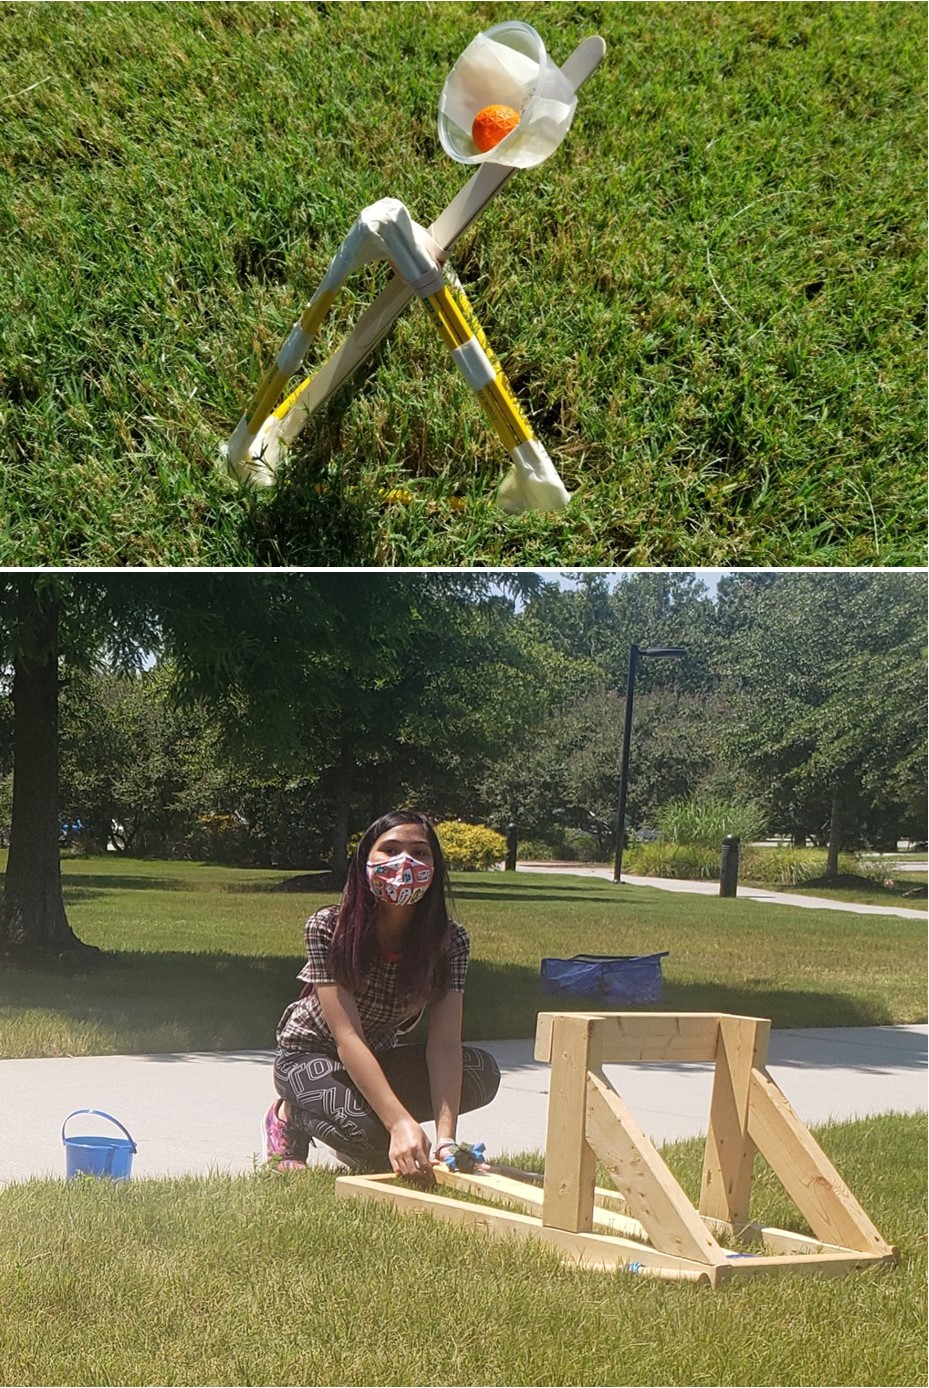 Project sample (top) and teen using launch catapult (bottom)